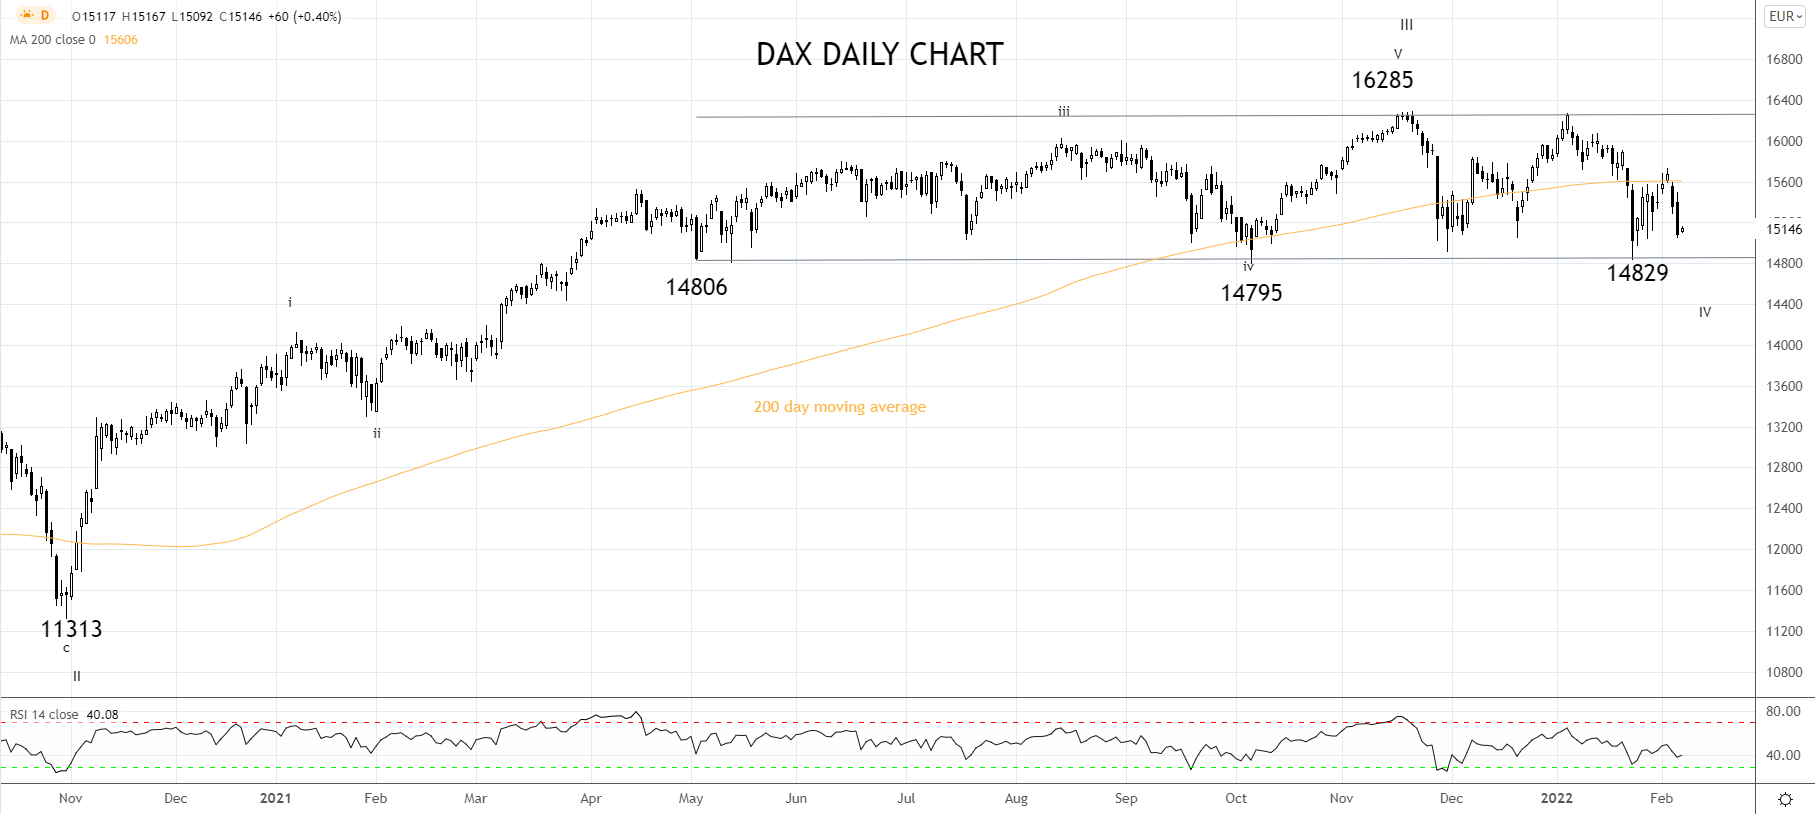 DAX Daily chart 7th of Feb